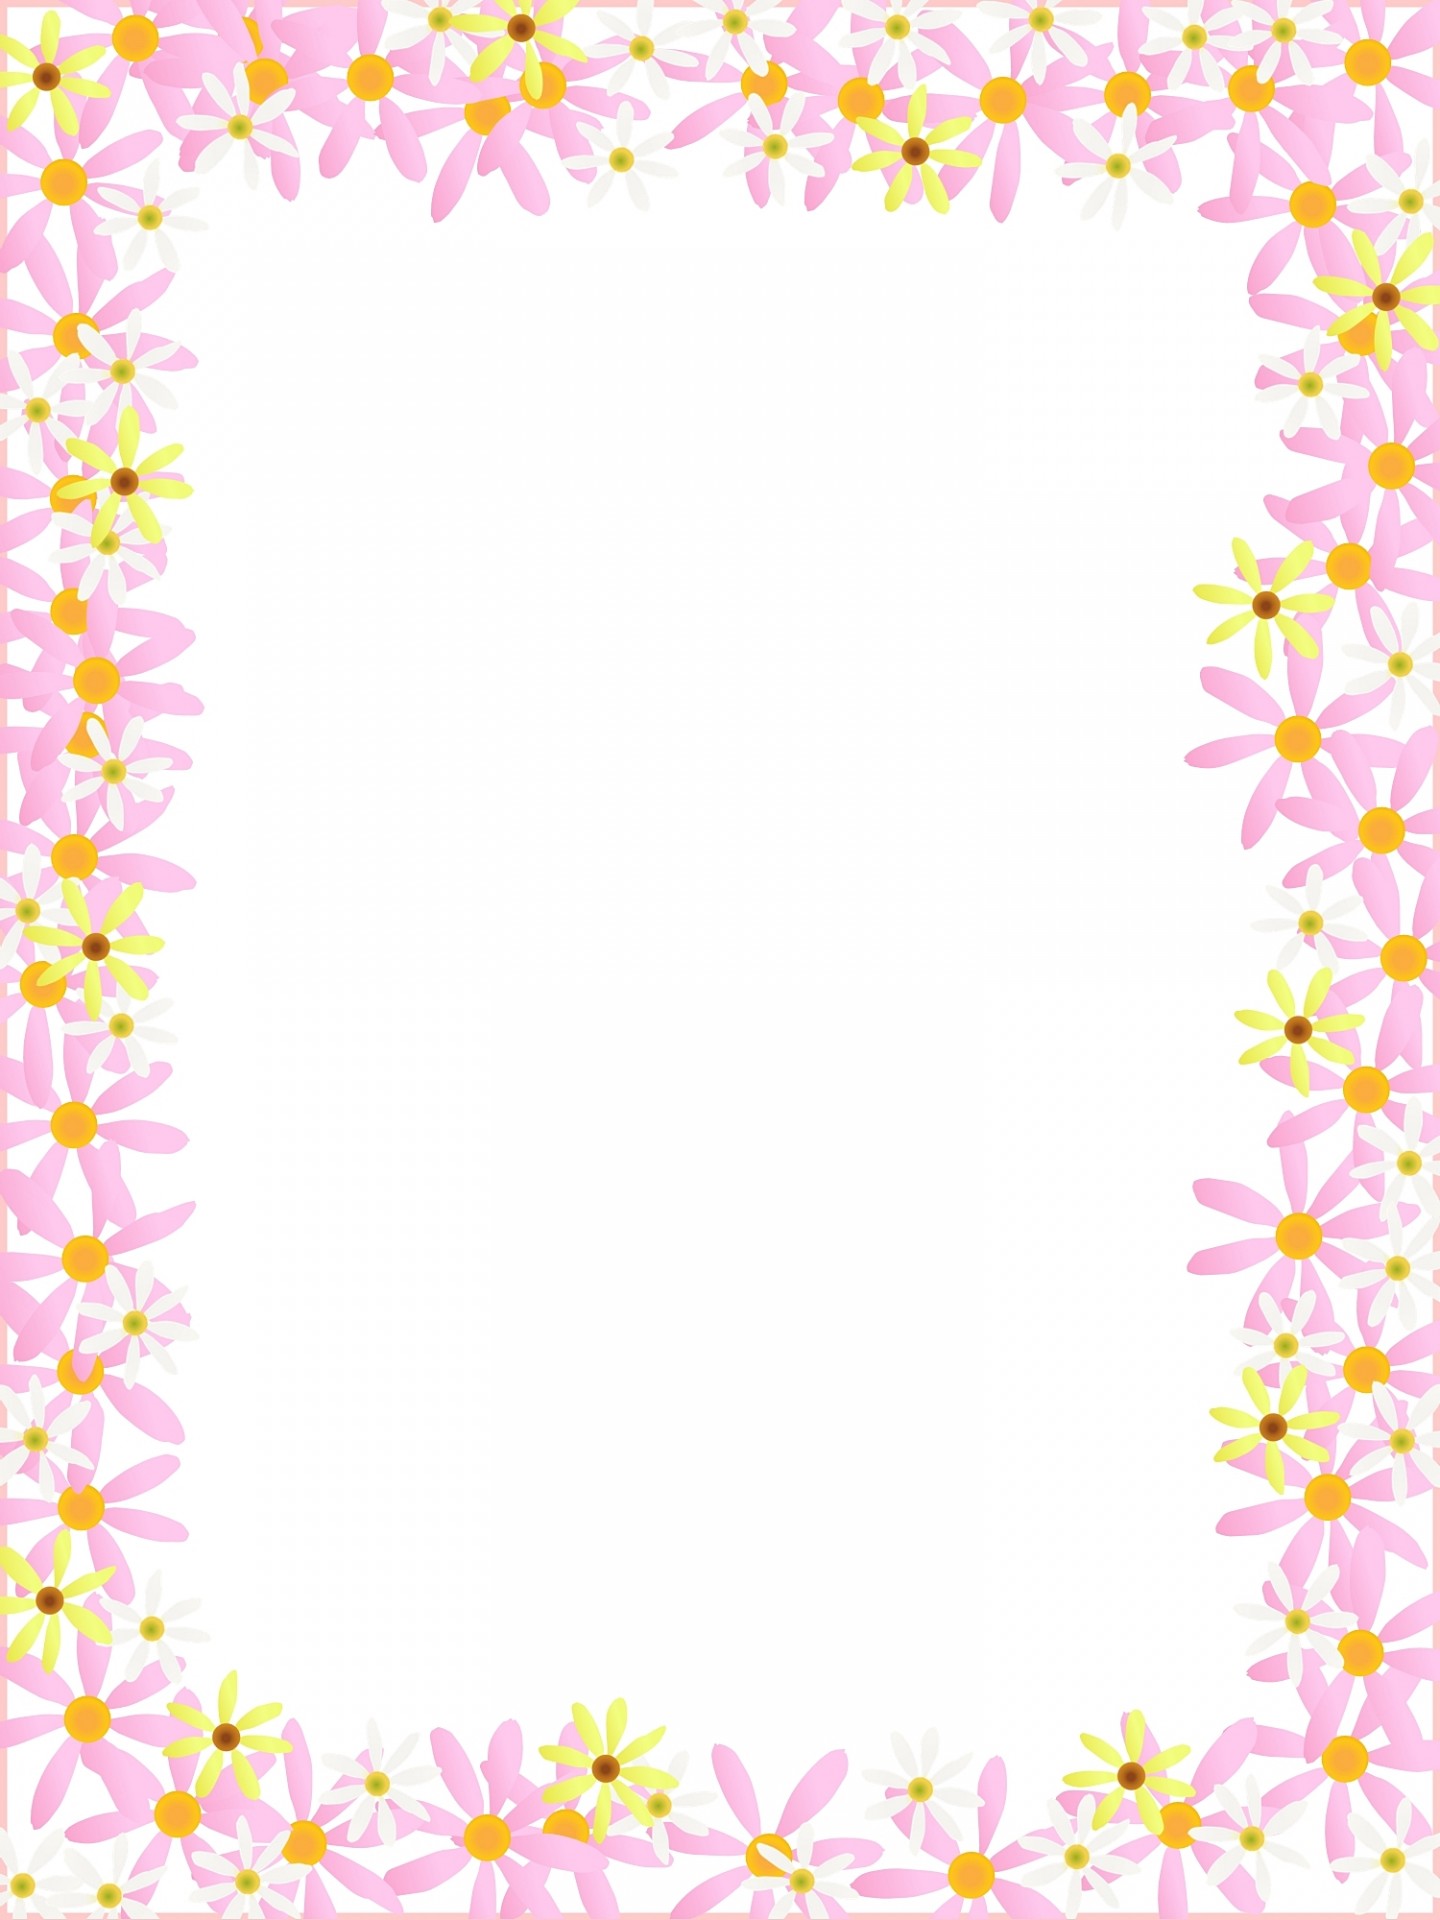 background picture frames flowers free photo